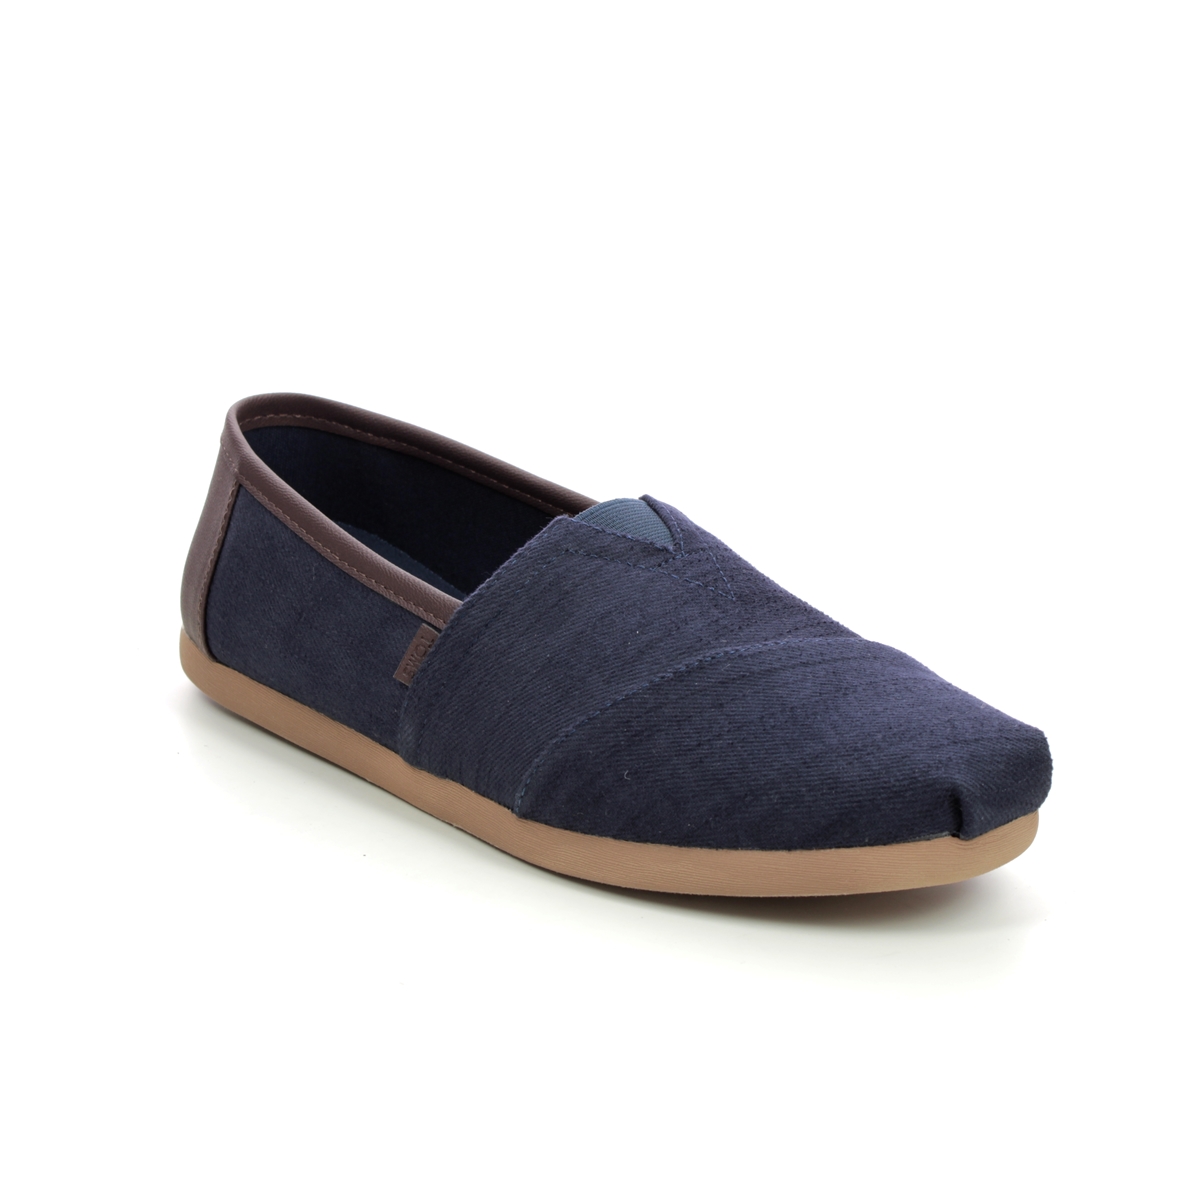 Toms Alpargata Classic 10017681- Navy Brown Slip-on Shoes